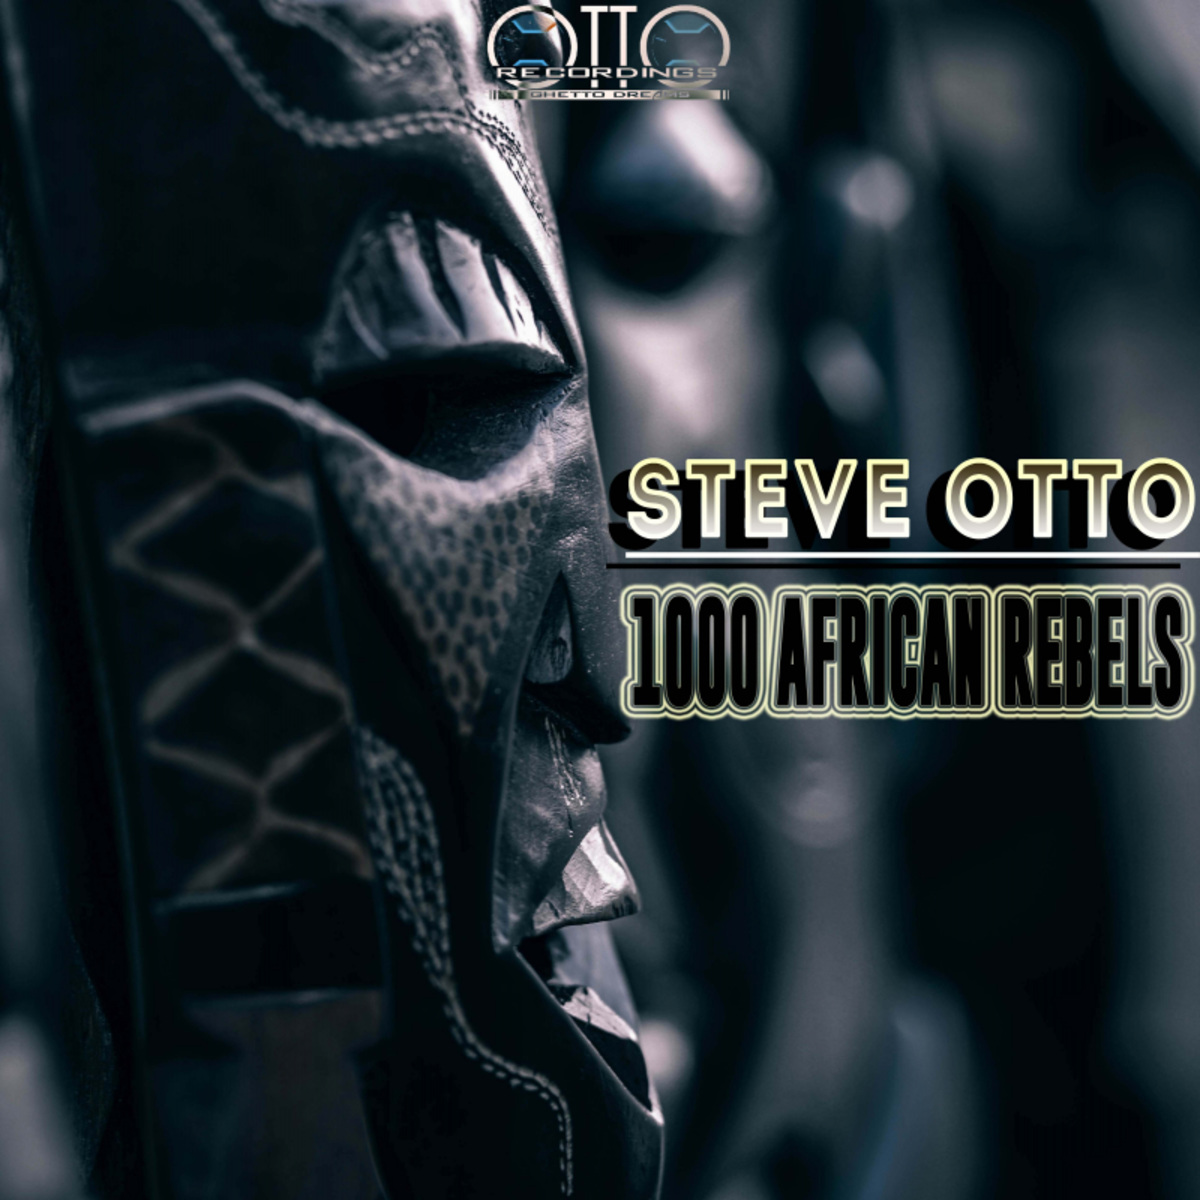 Steve Otto - 1000 African Rebels / Otto Recordings